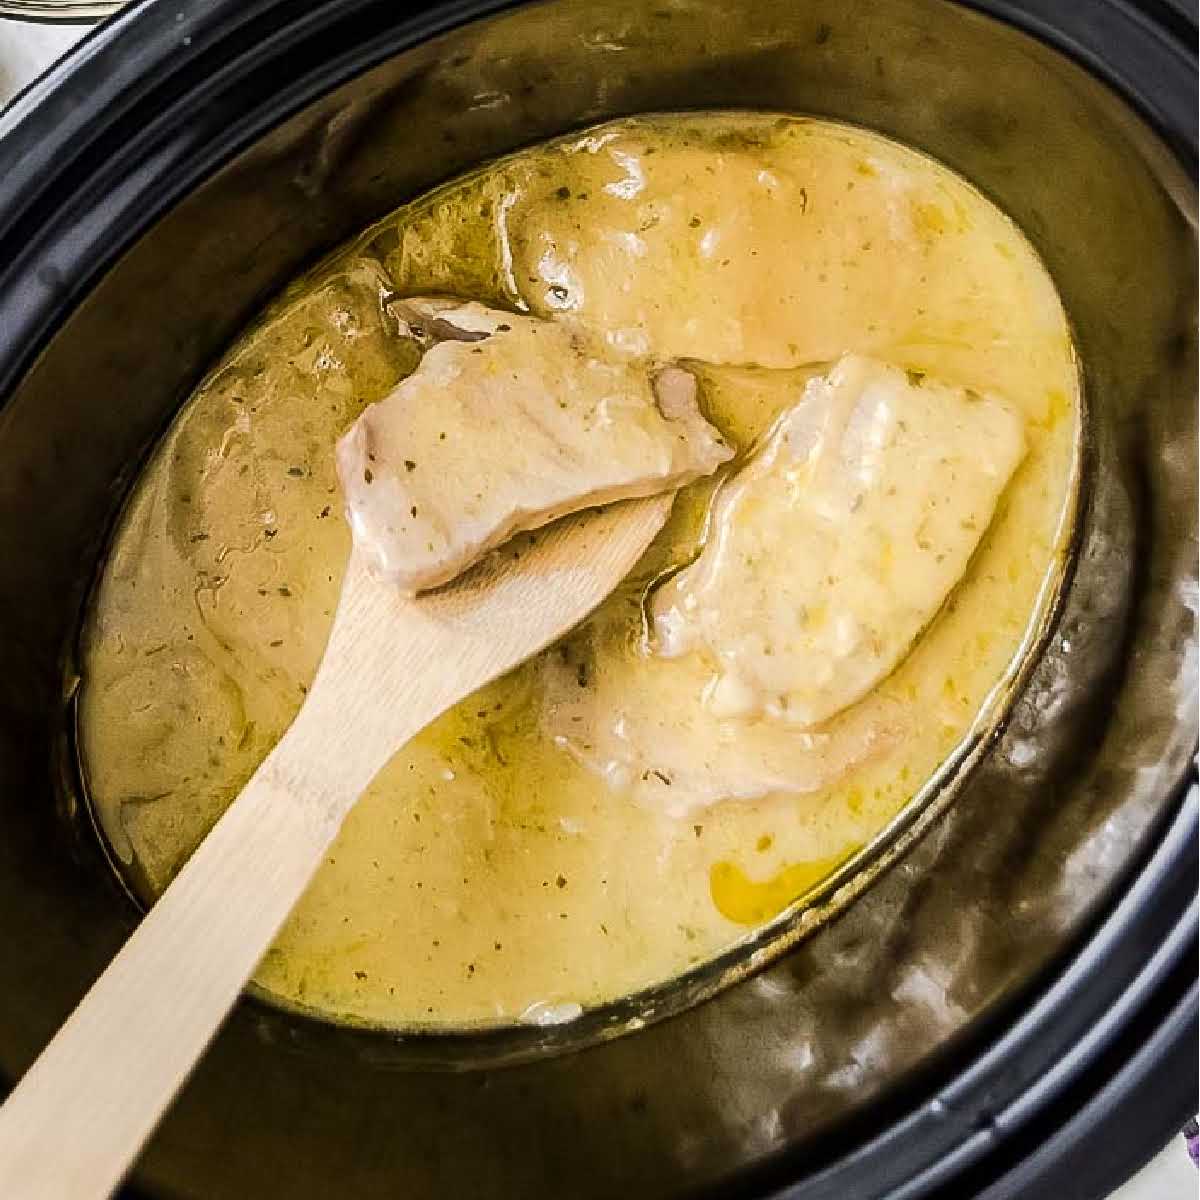 Ranch pork chops with gravy in a crockpot with a wooden spoon.